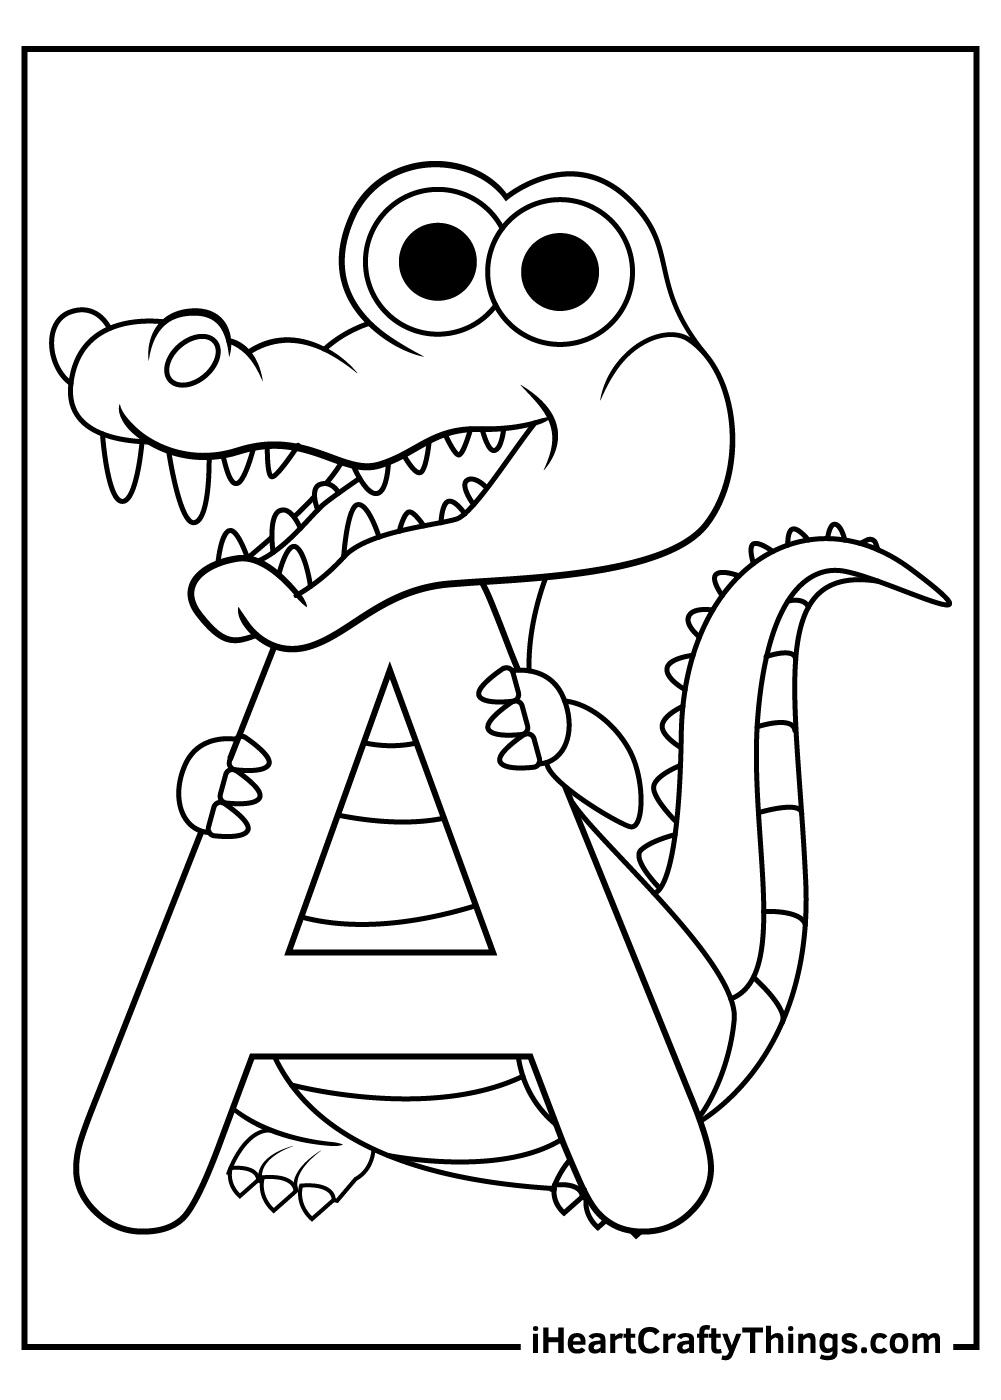 Printable Alligators Coloring Pages Updated 20